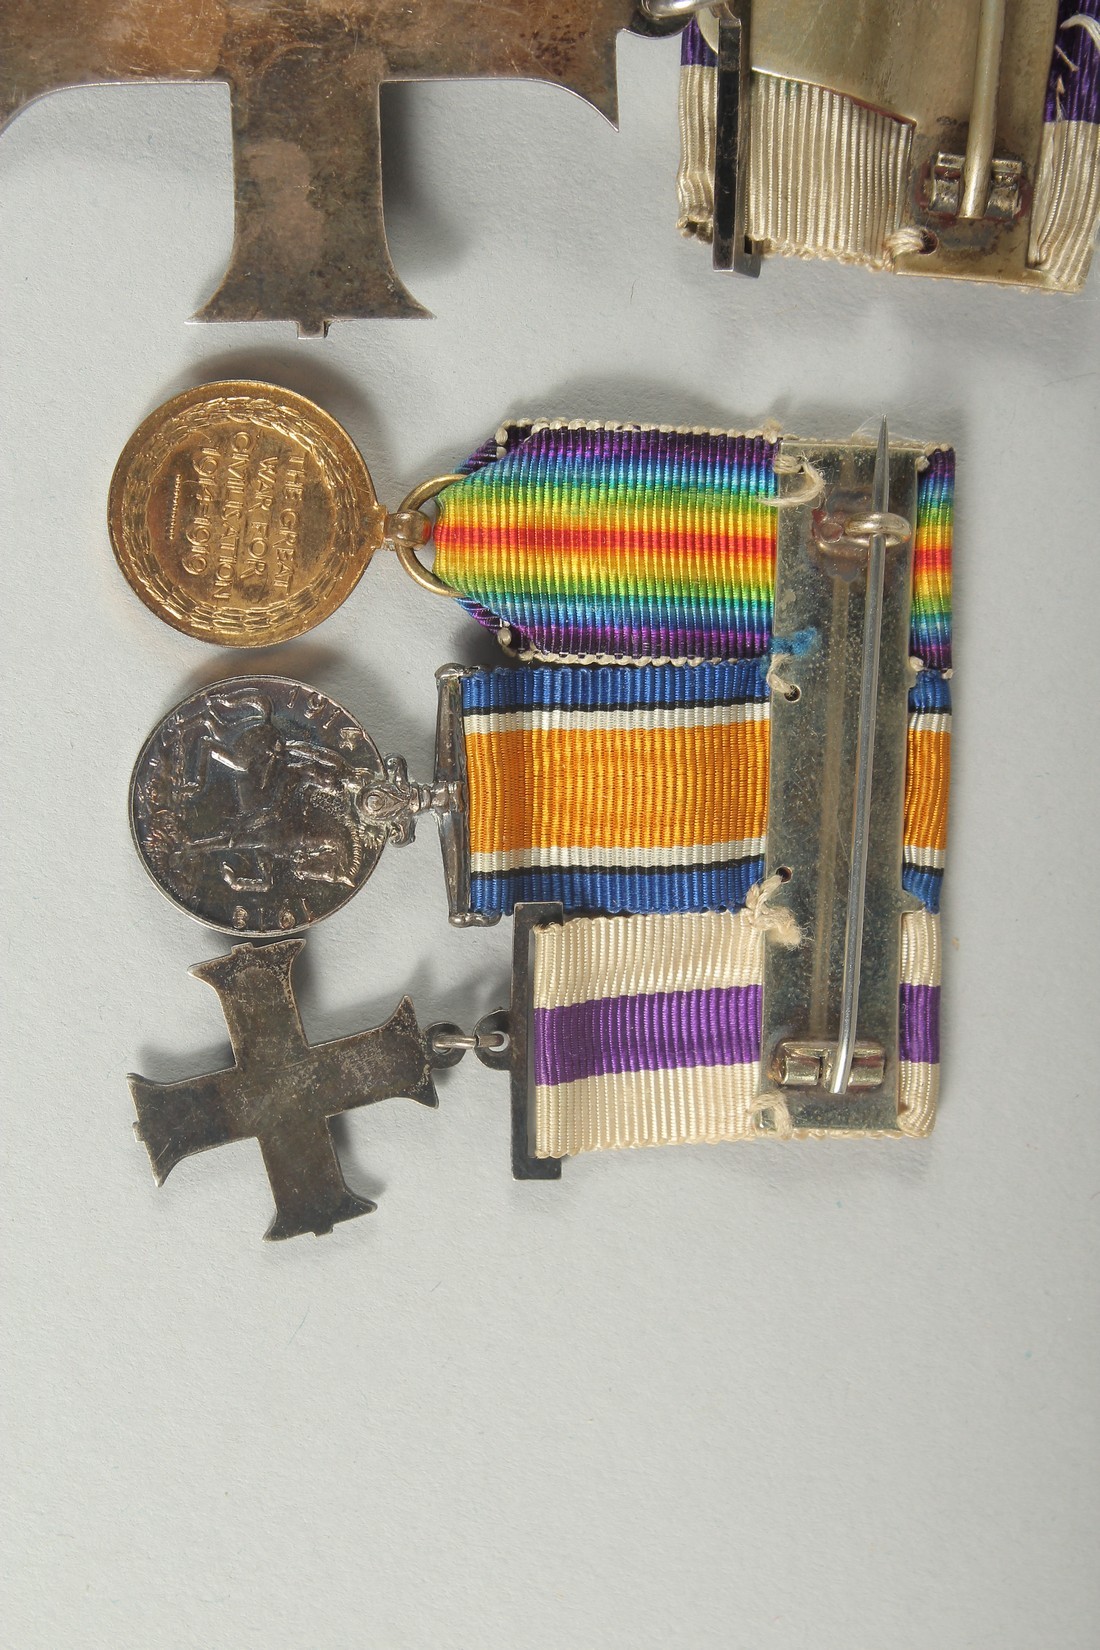 CAPTAIN J. SCOTT. MILITARY CROSS. 1914 - 1918 WAR MEDAL AND VICTORIA MEDAL, plus a set of three - Image 7 of 8